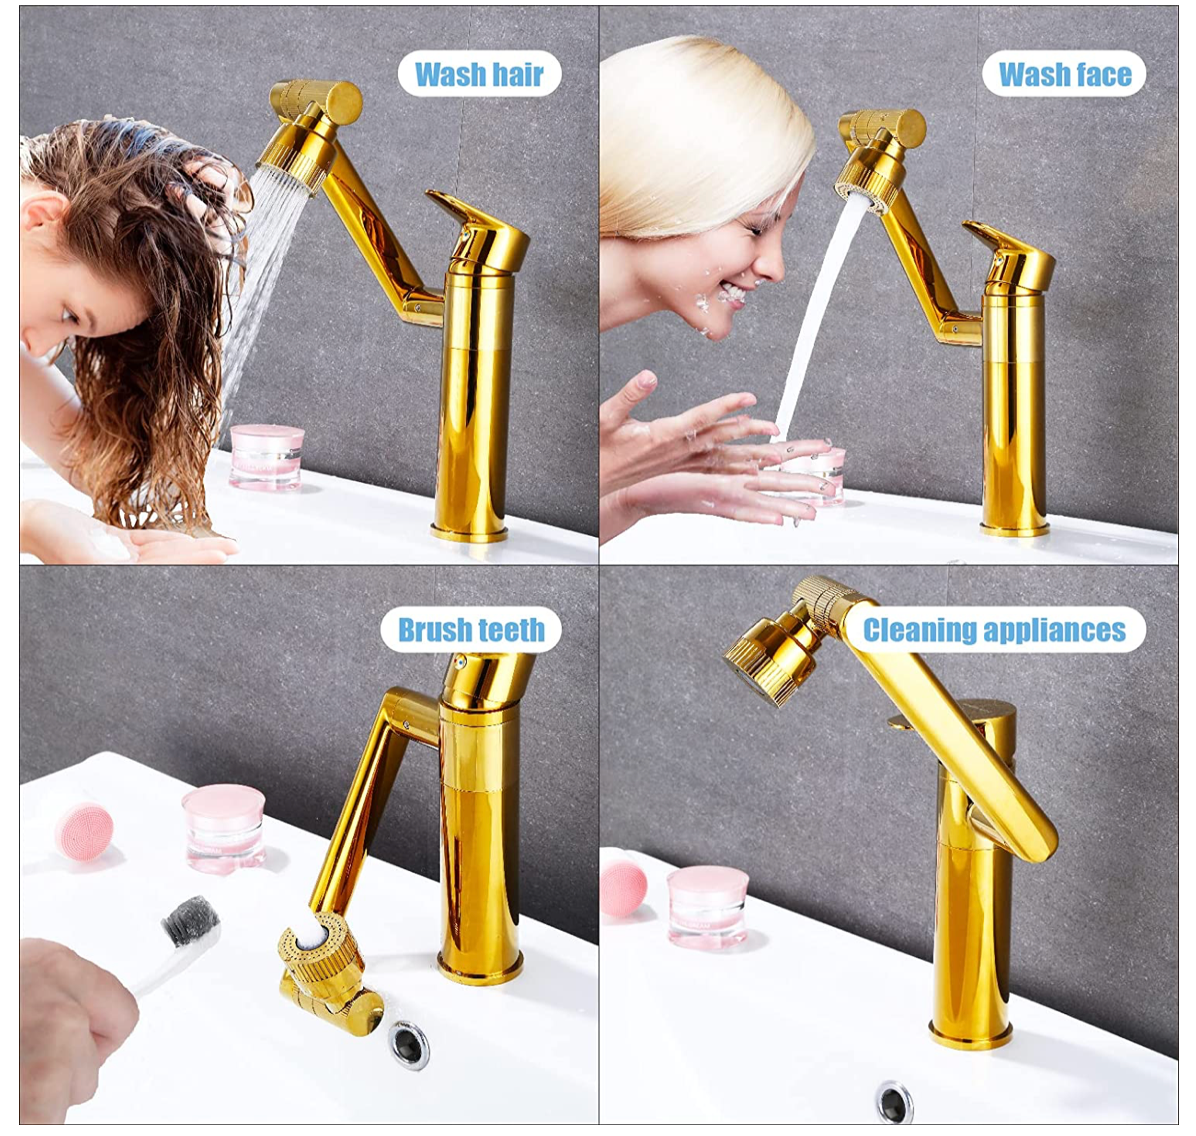 The Swiveling Faucet